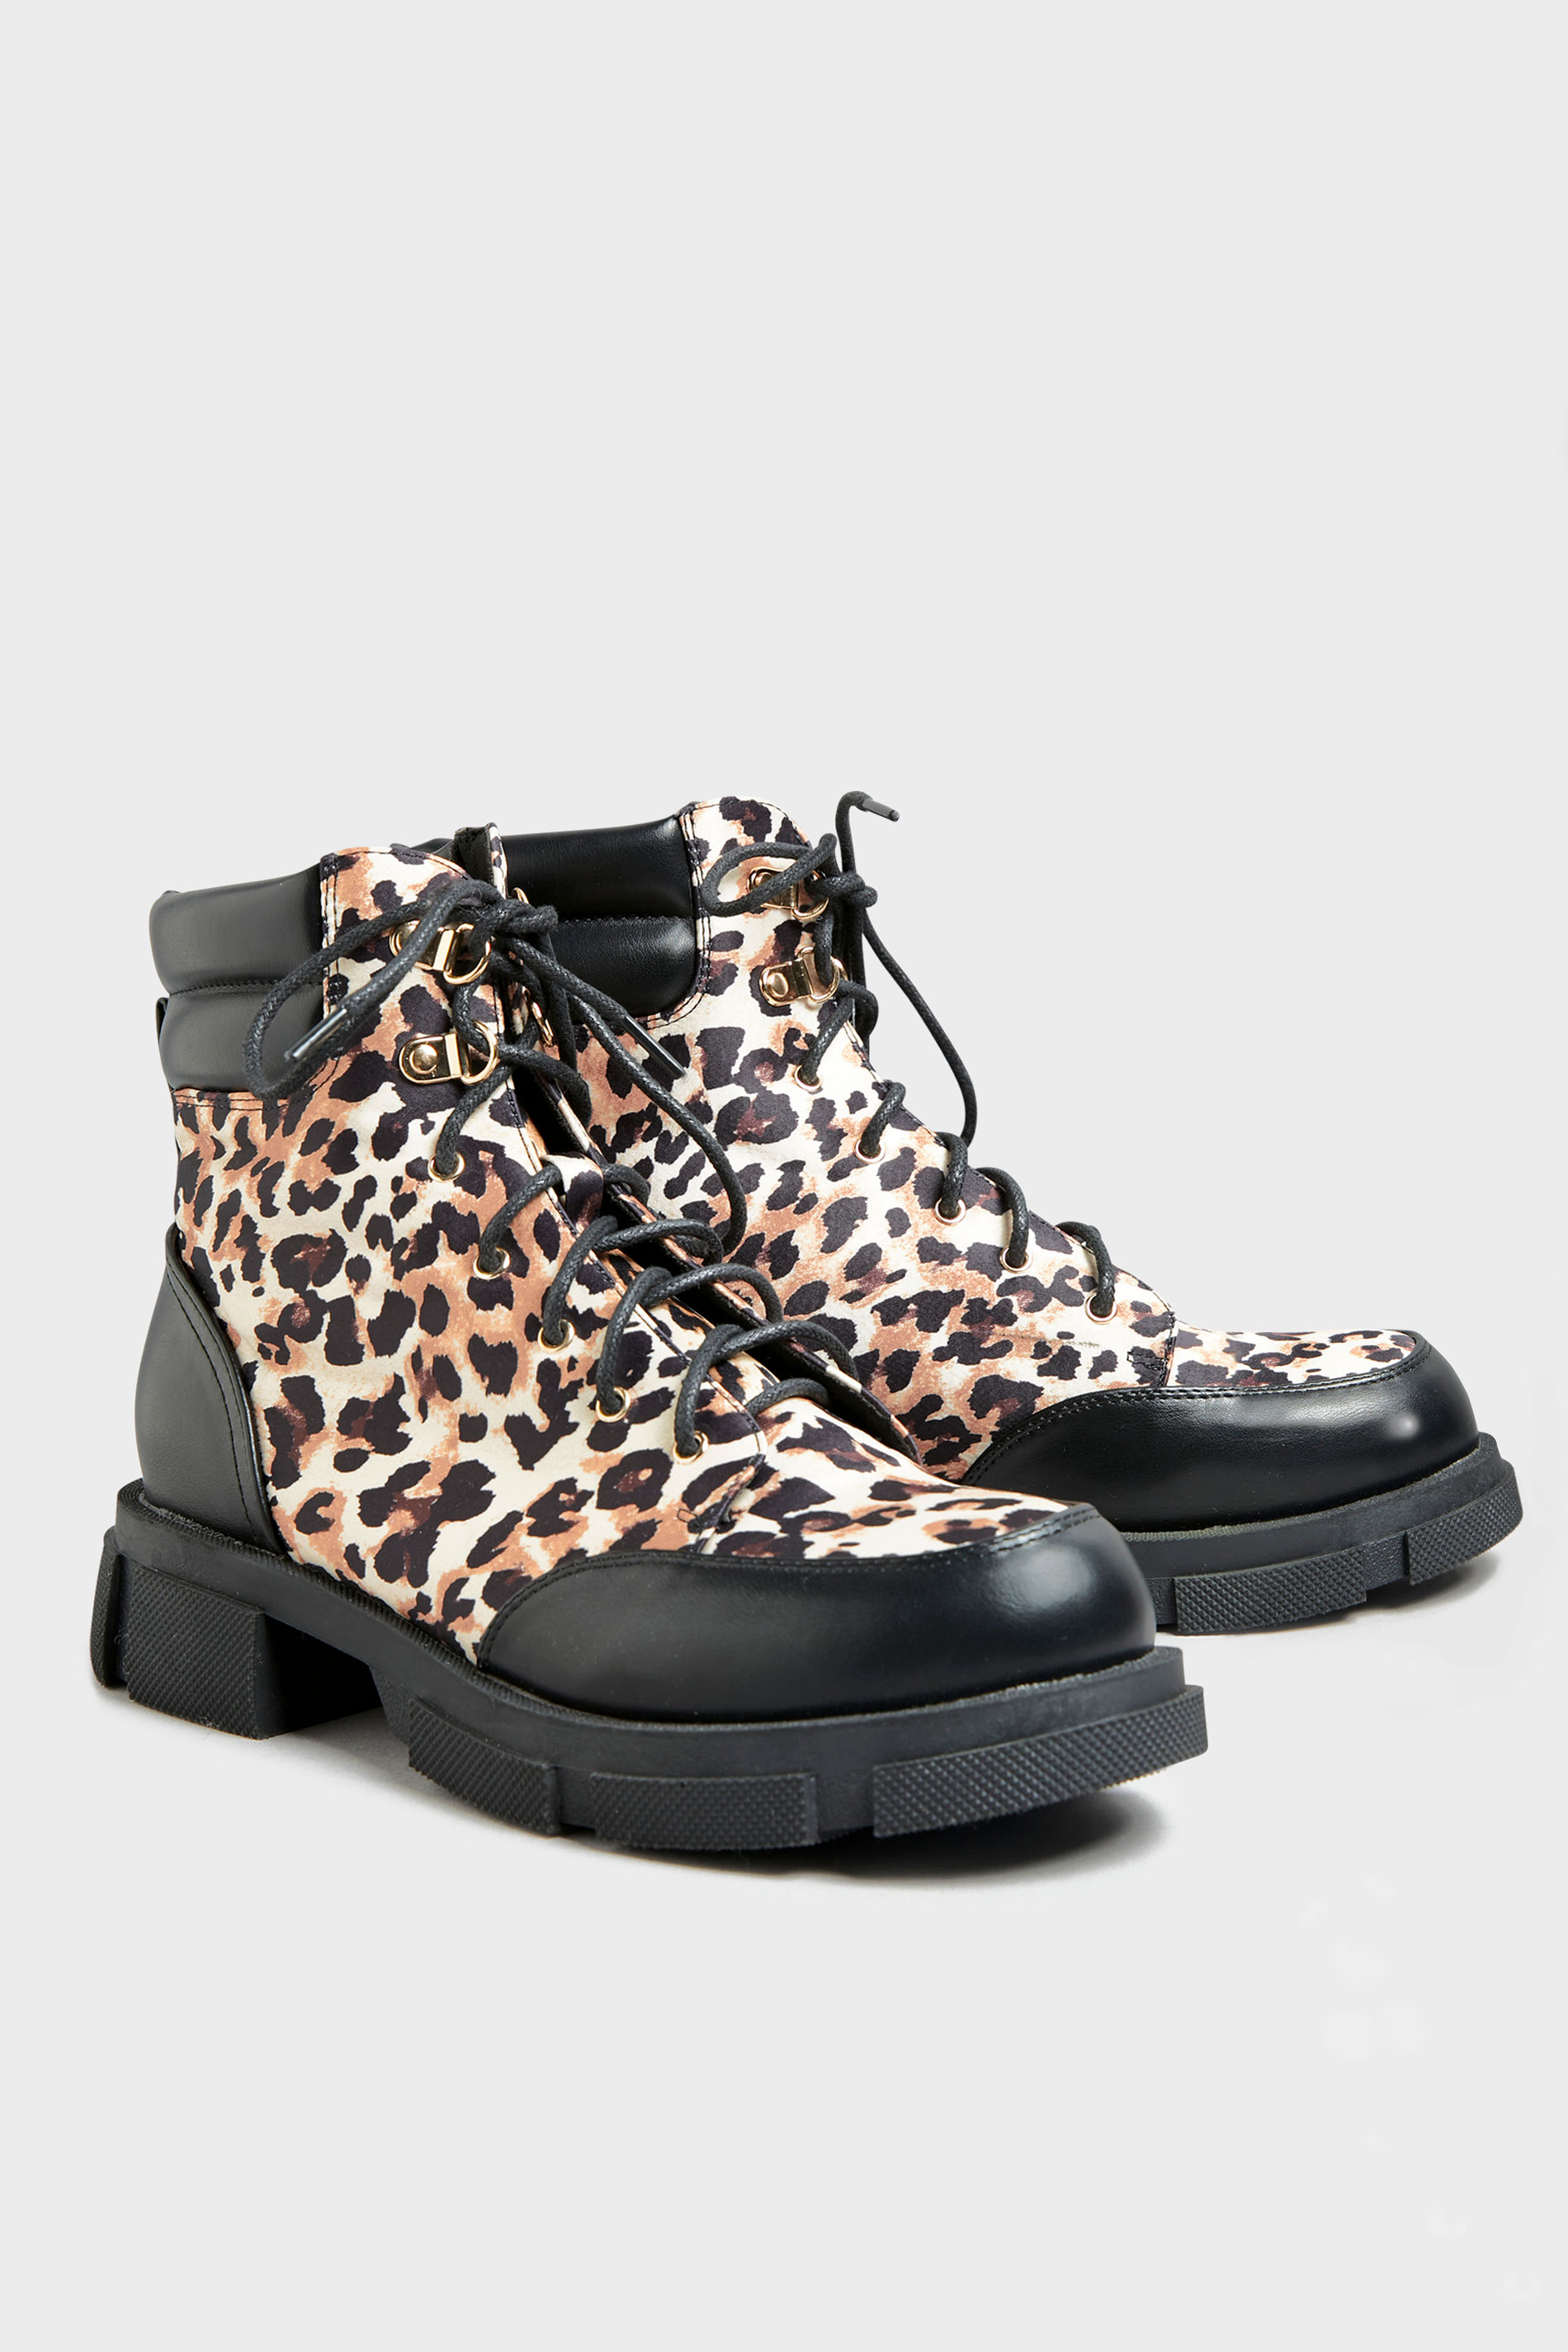 LIMITED COLLECTION Black Leopard Faux Leather Lace Up Boots In Wide Fit_C.jpg